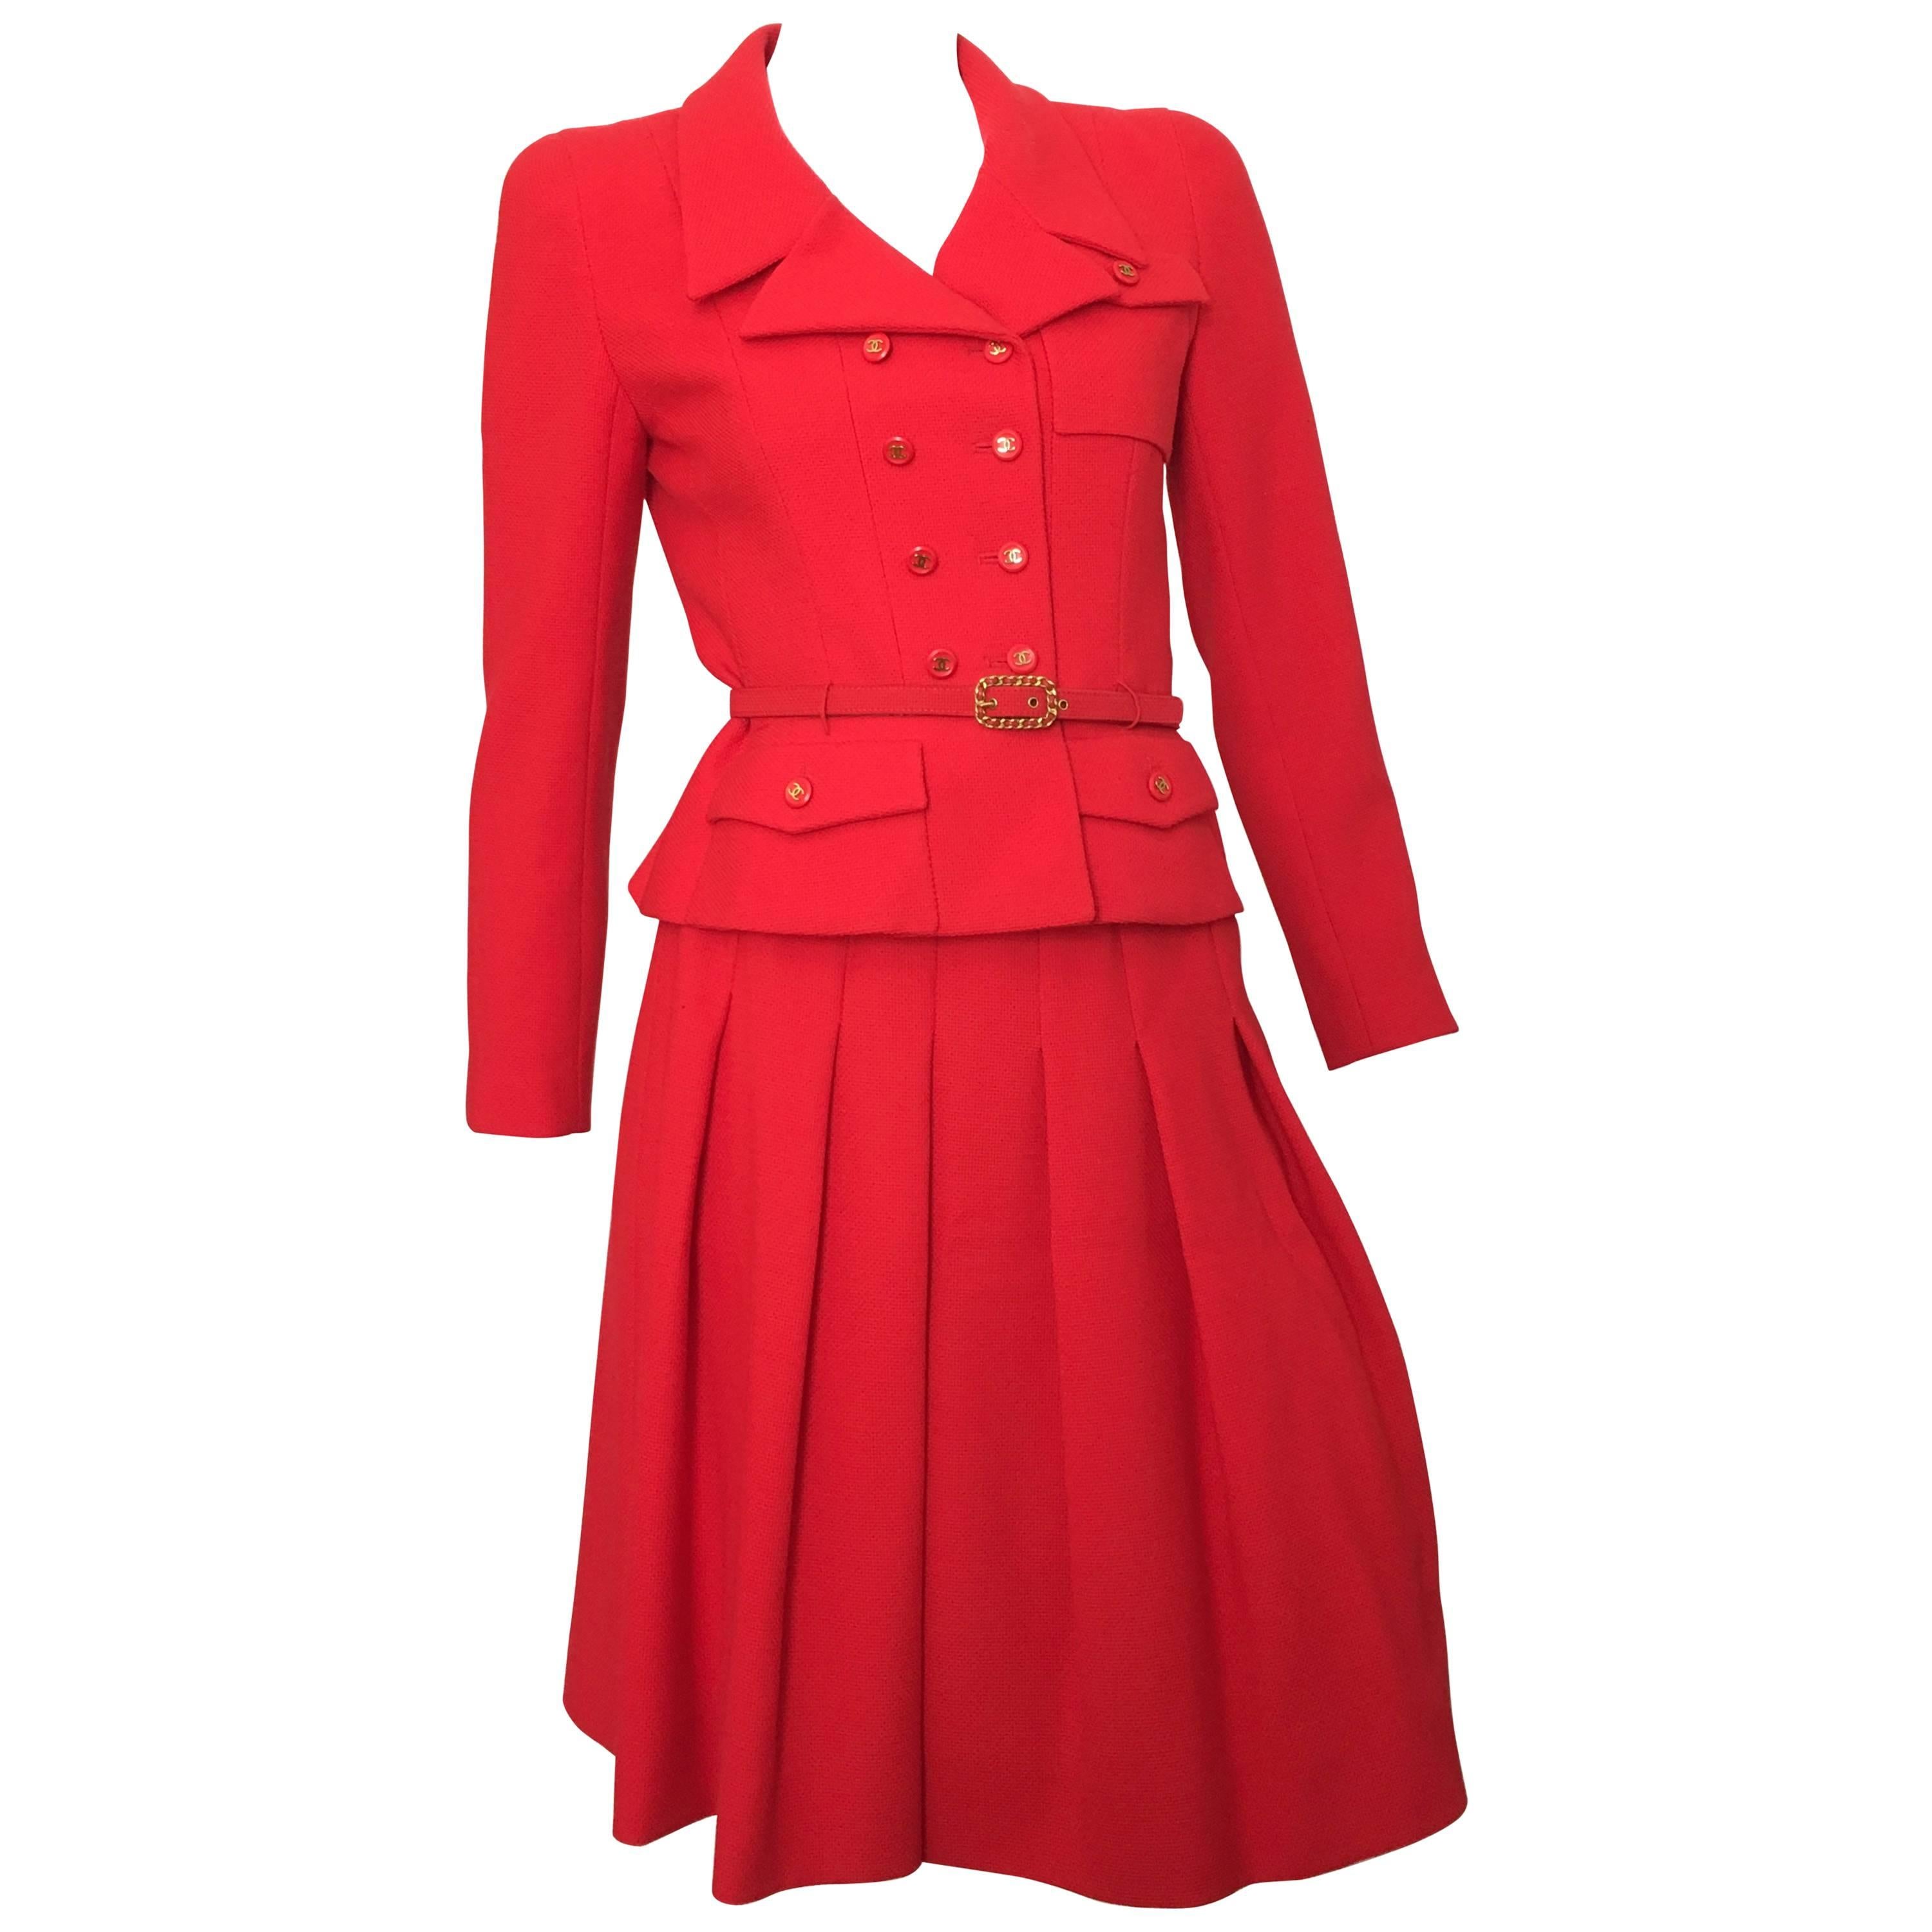 Chanel Red Suit Jacket & Pleated Skirt Size 4.